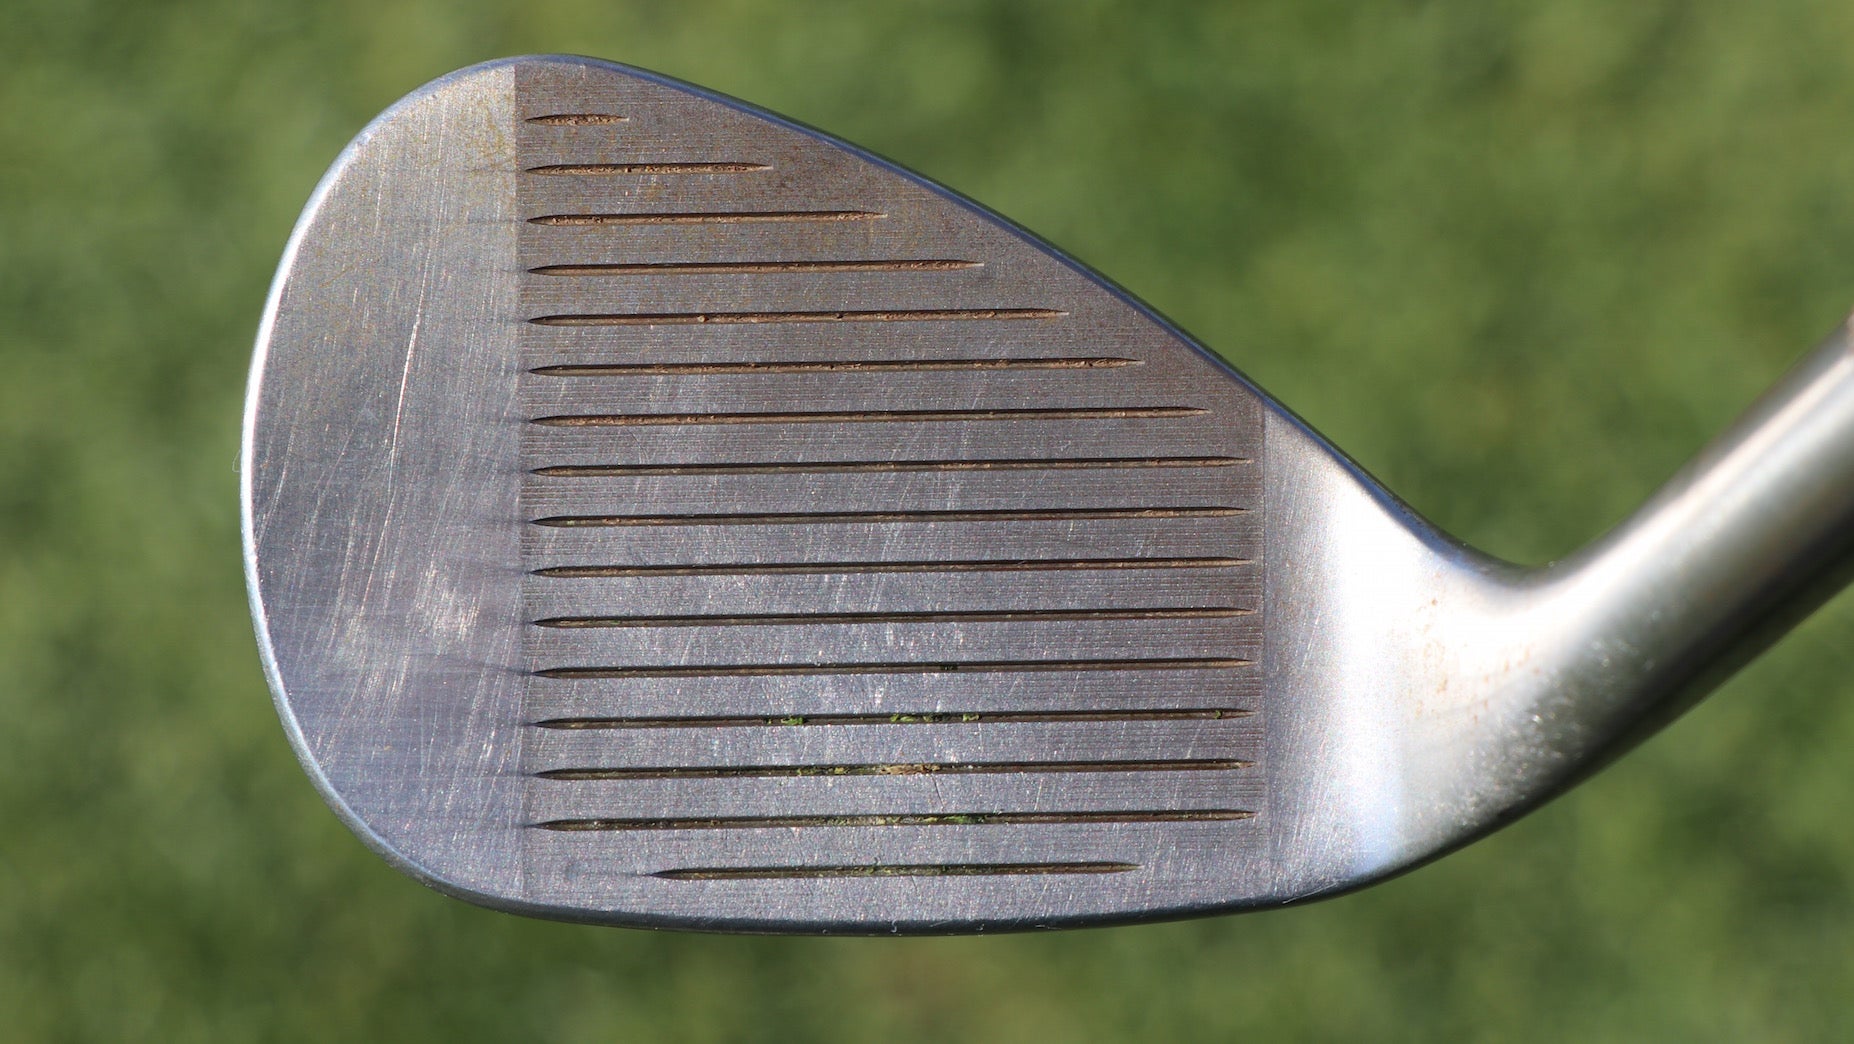 6 gear tips to help you spin the ball more with your wedges